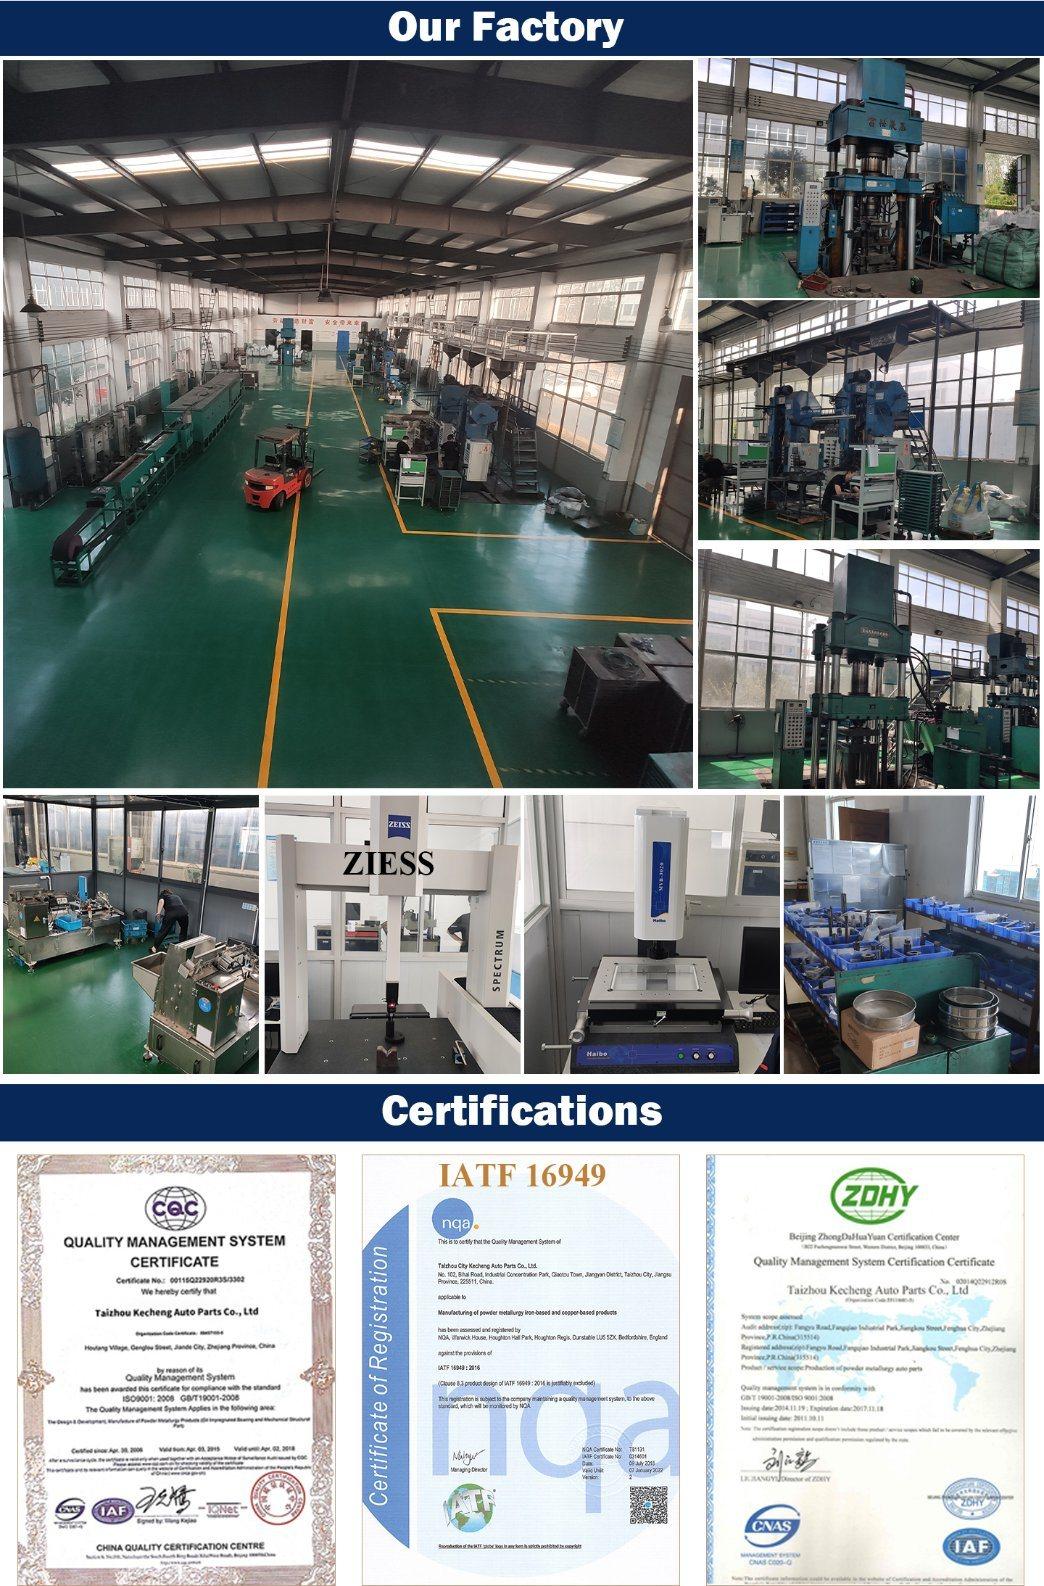 Non-Standard CNC Machinery Alloy Iron Lock Electrical Tools Textile Compressor Auto Motorcycle Engine Transmission Copper Parts